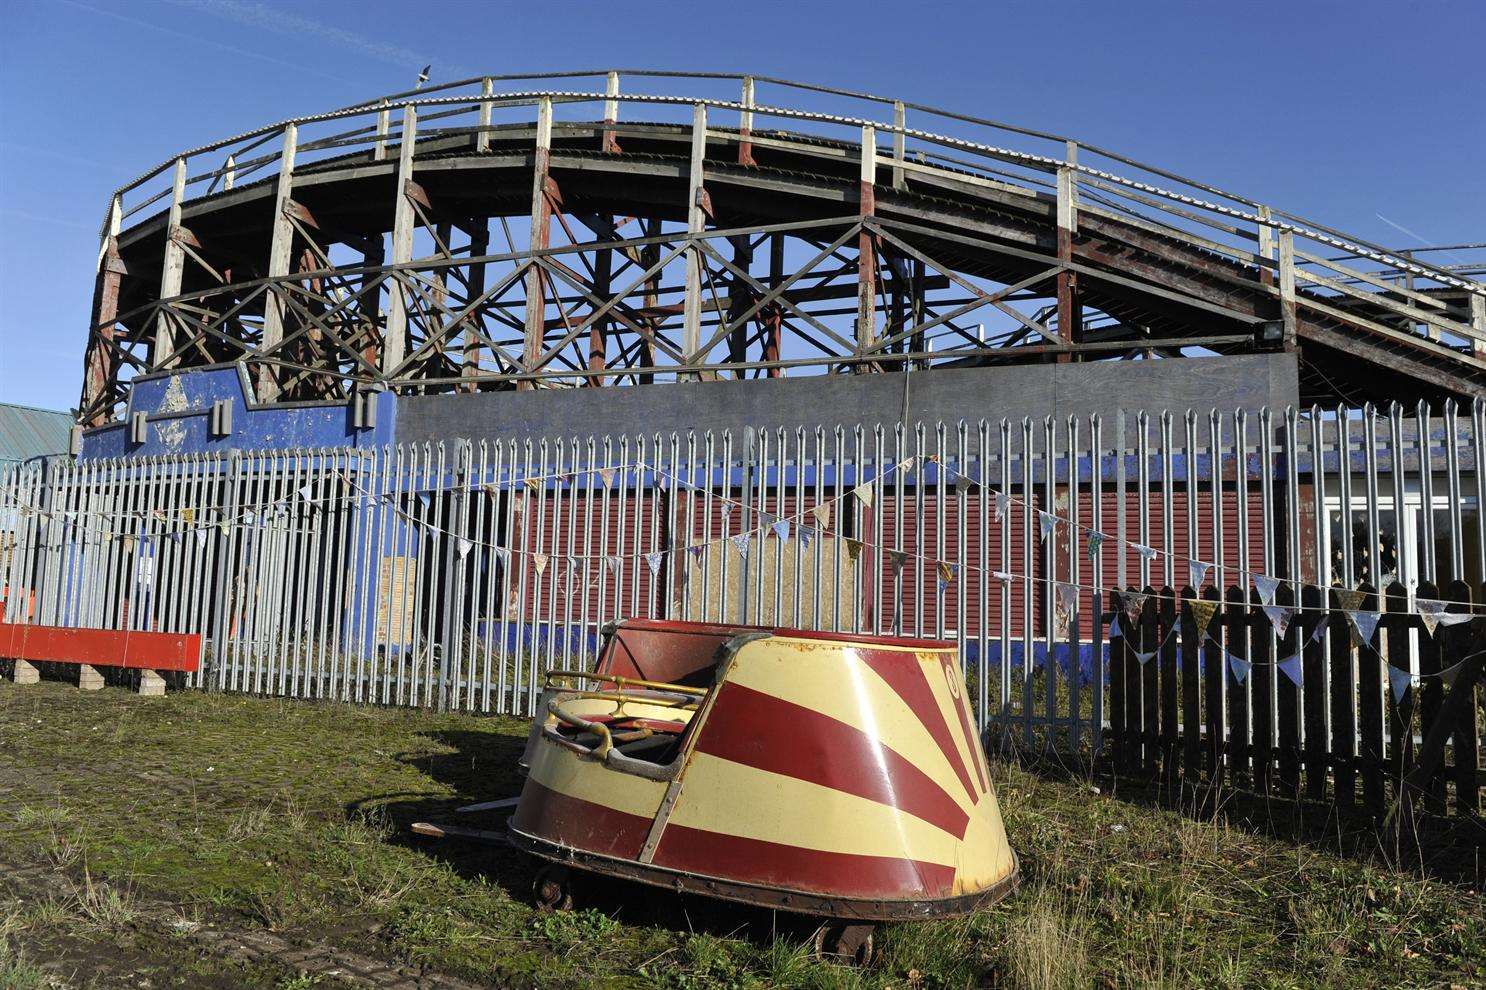 The Reimagined Dreamland will make use of all the equipment left over after it closed in 2006